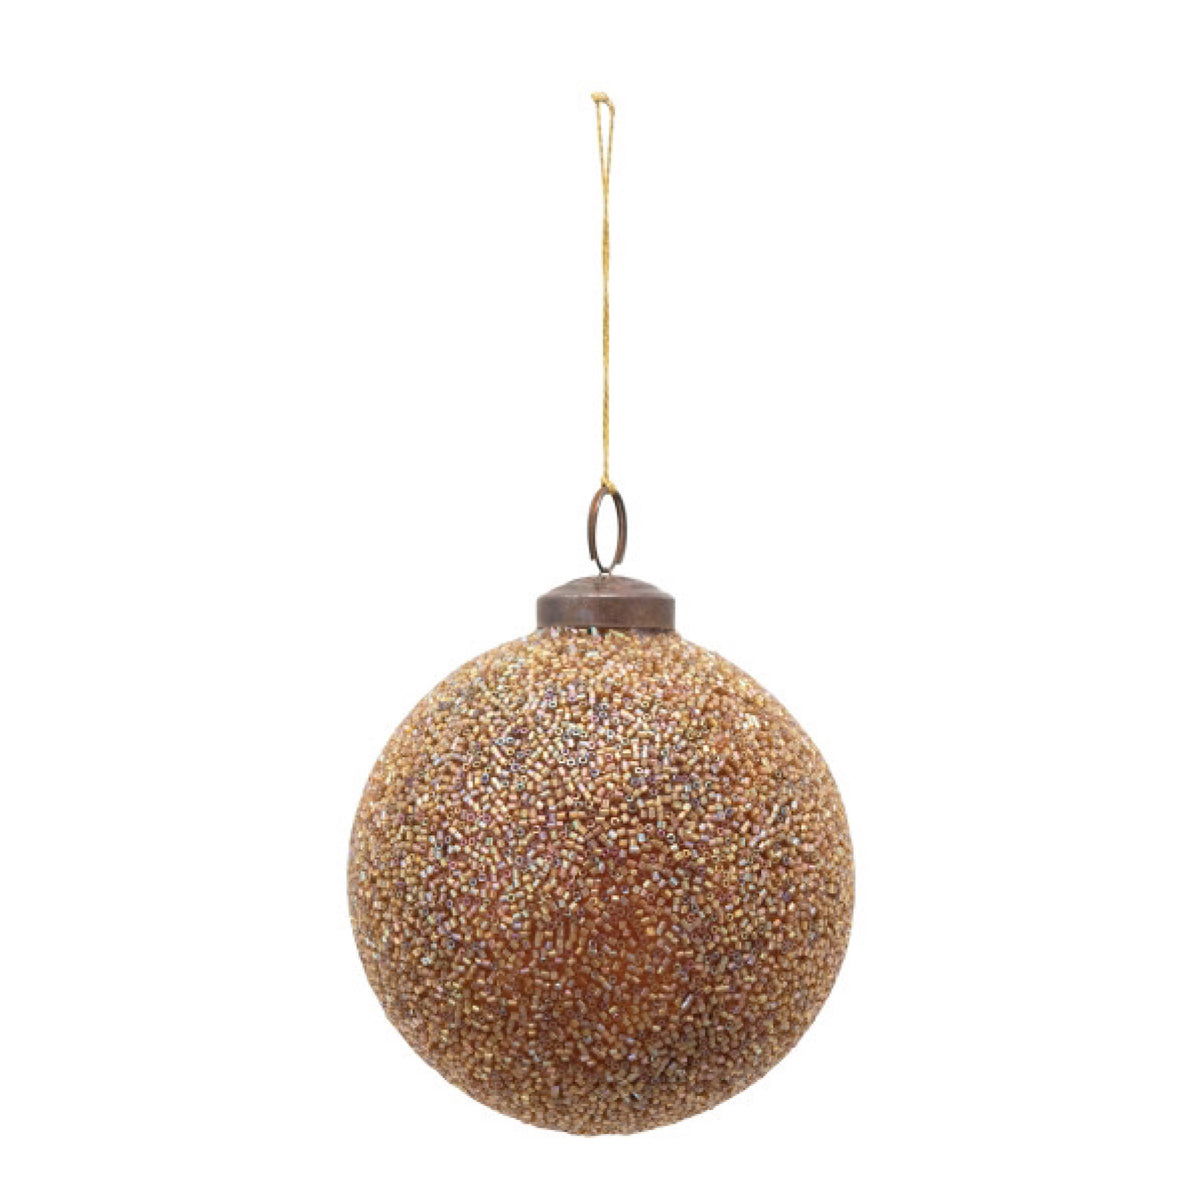 Ornament with Iridescent Beads, 3 Sizes